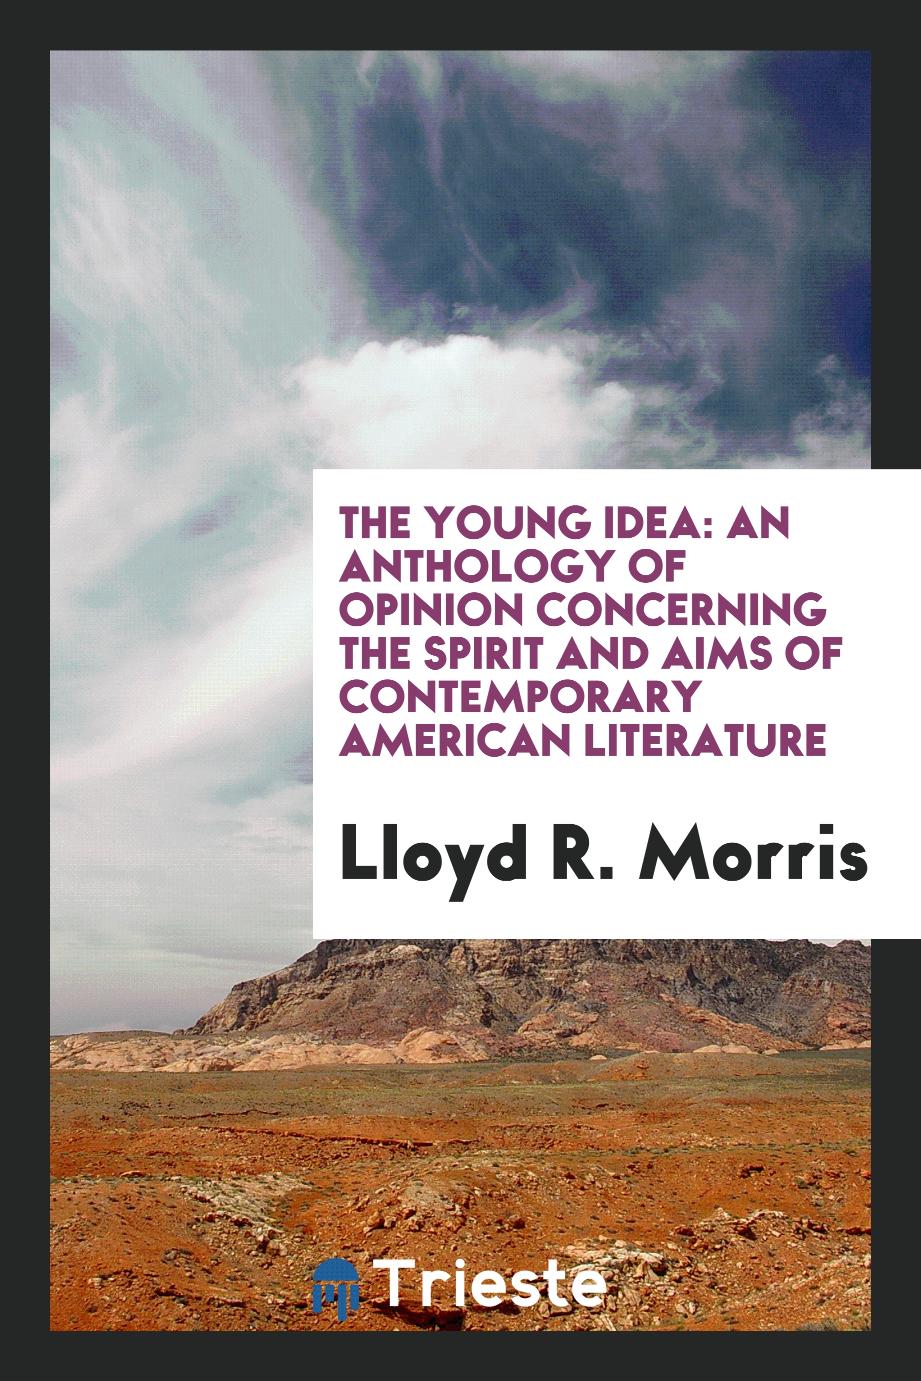 The Young Idea: An Anthology of Opinion Concerning the Spirit and Aims of Contemporary American Literature